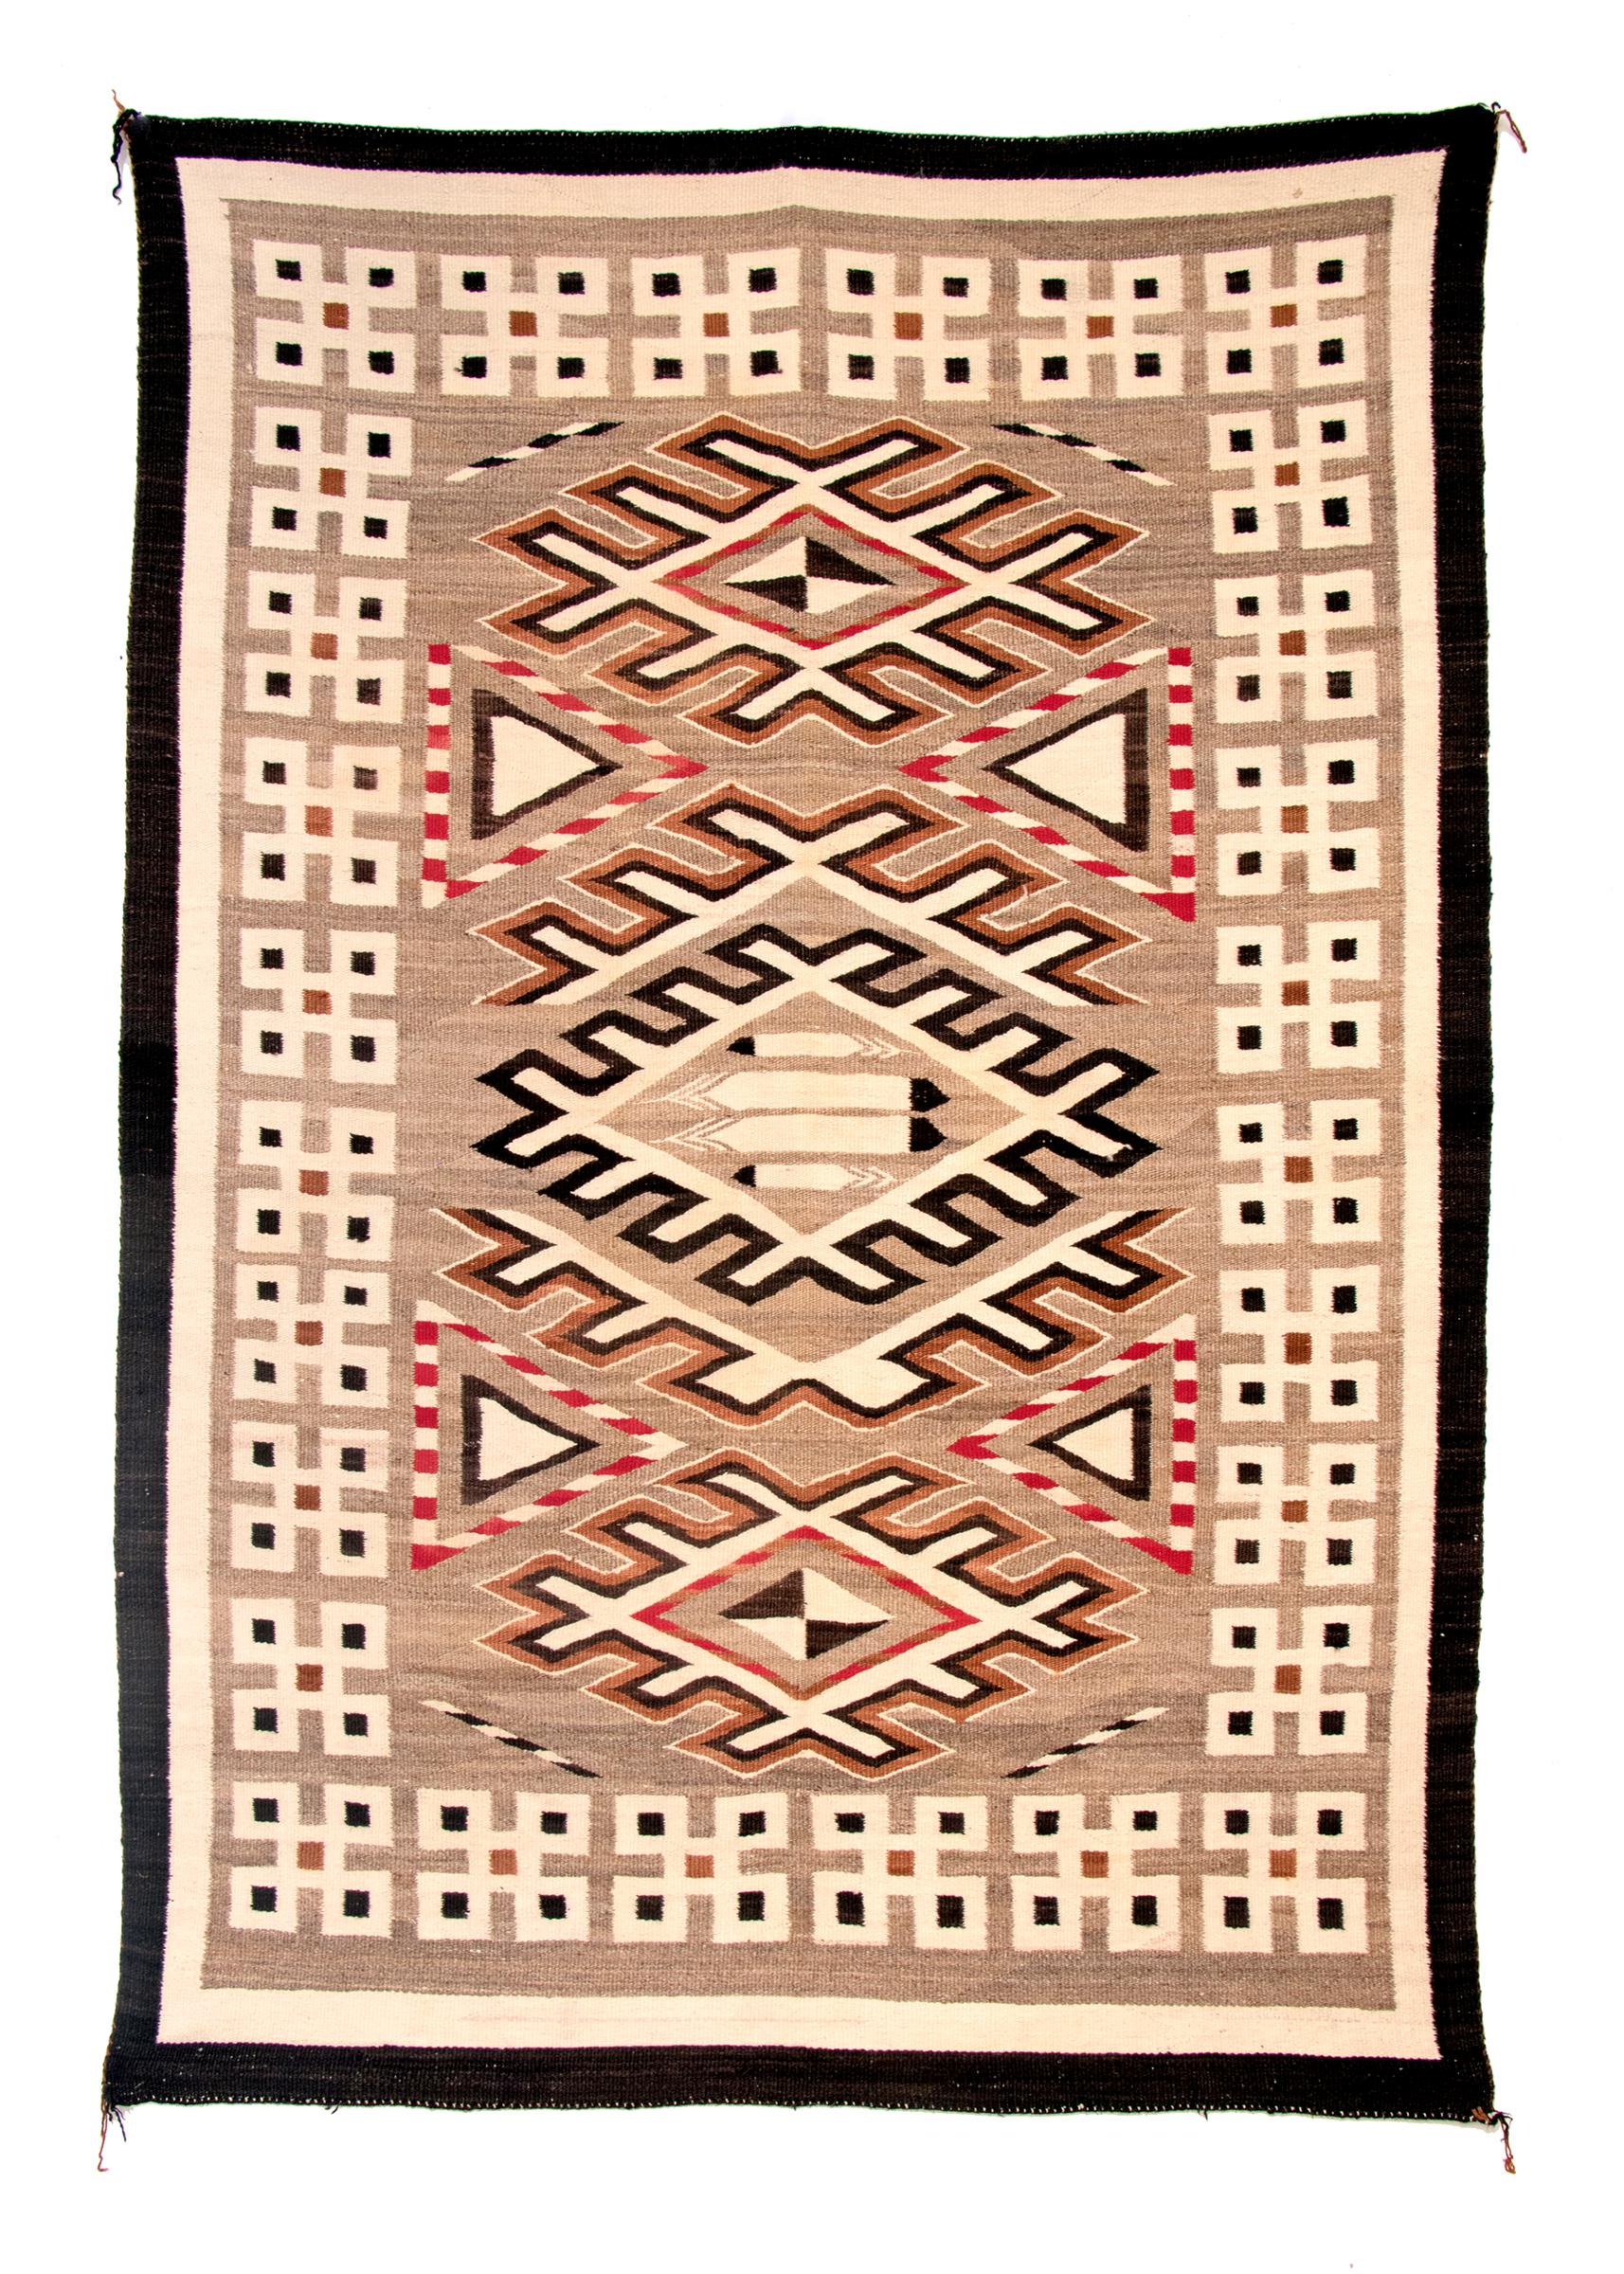 American Vintage 20th Century Navajo Rug from the Trading Post Era